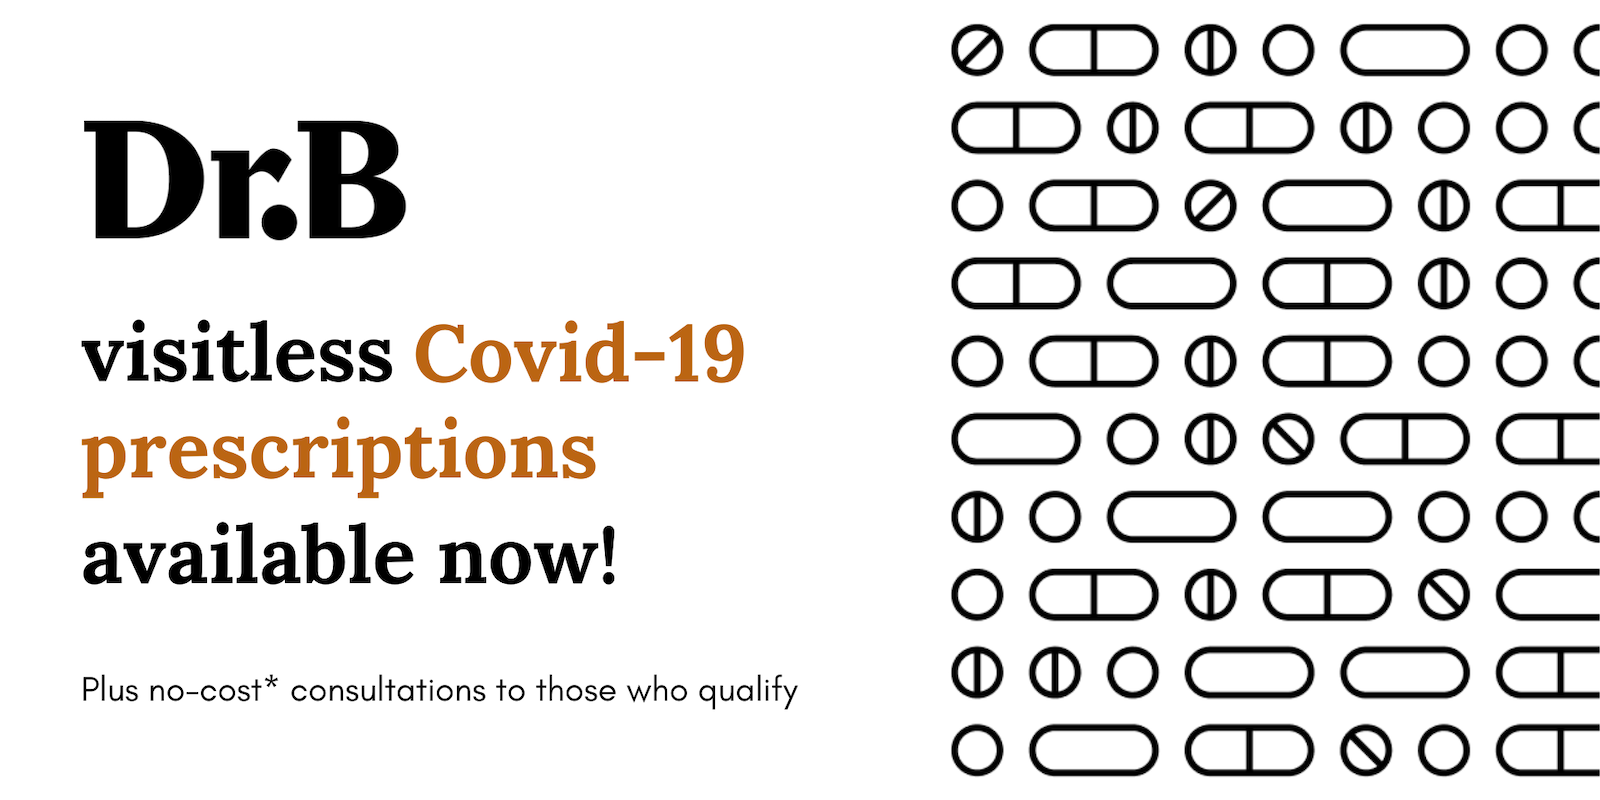 A graphic banner image of outlined pills on a white background and the words: Dr.B visitless Covid-19 prescriptions available now! Plus no-cost consultations to those who qualify